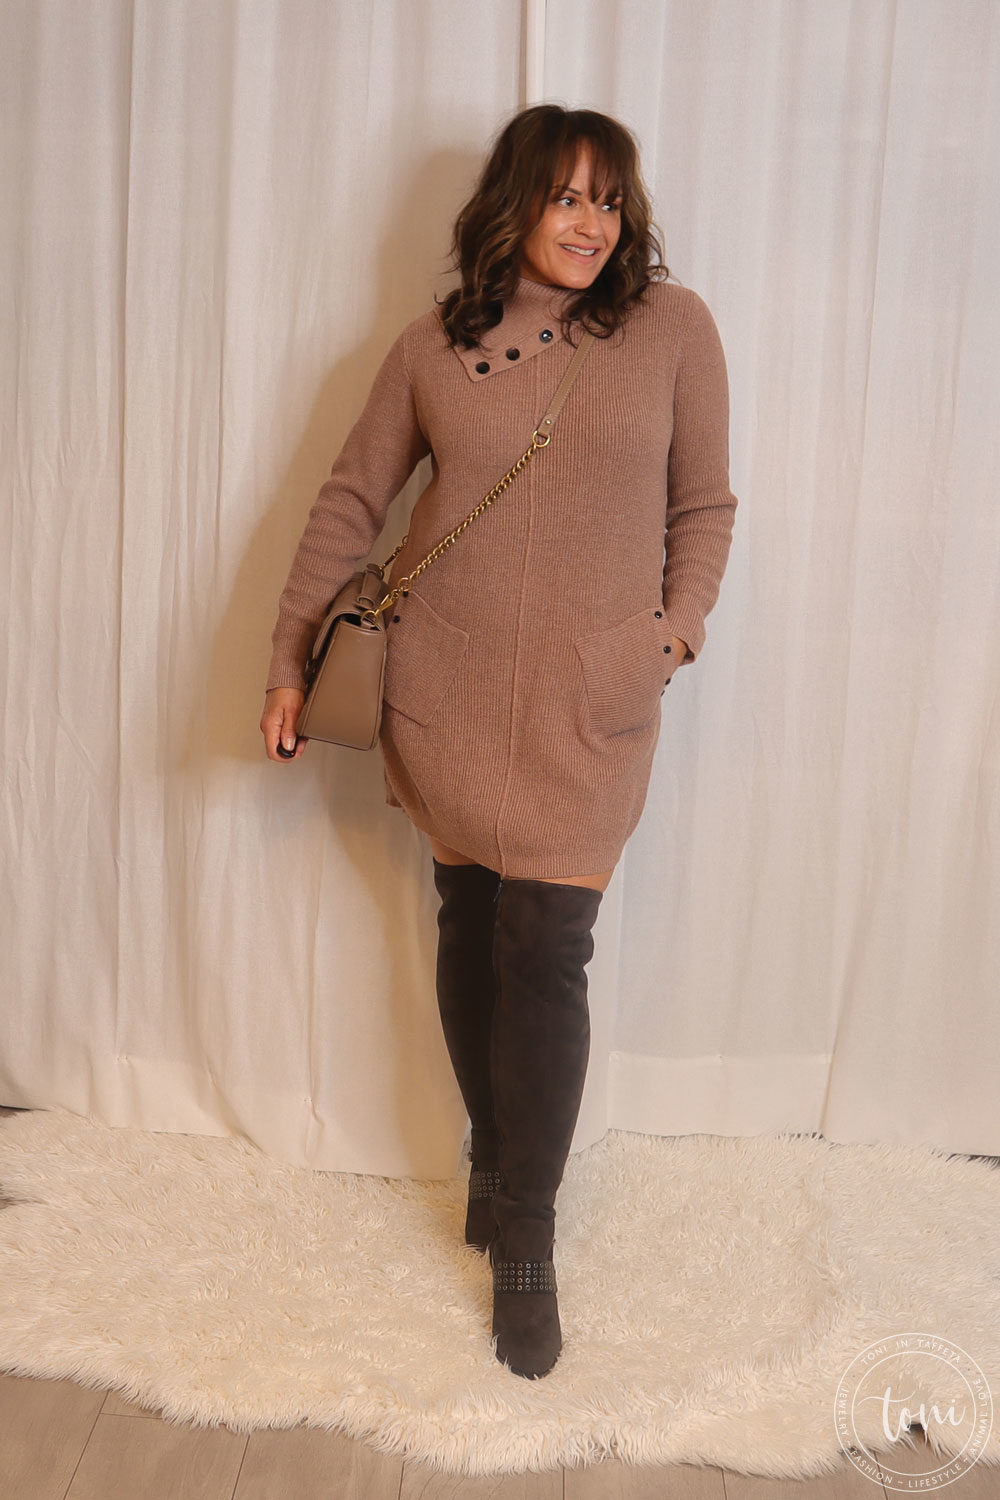 Long Sweater with over the knee boot